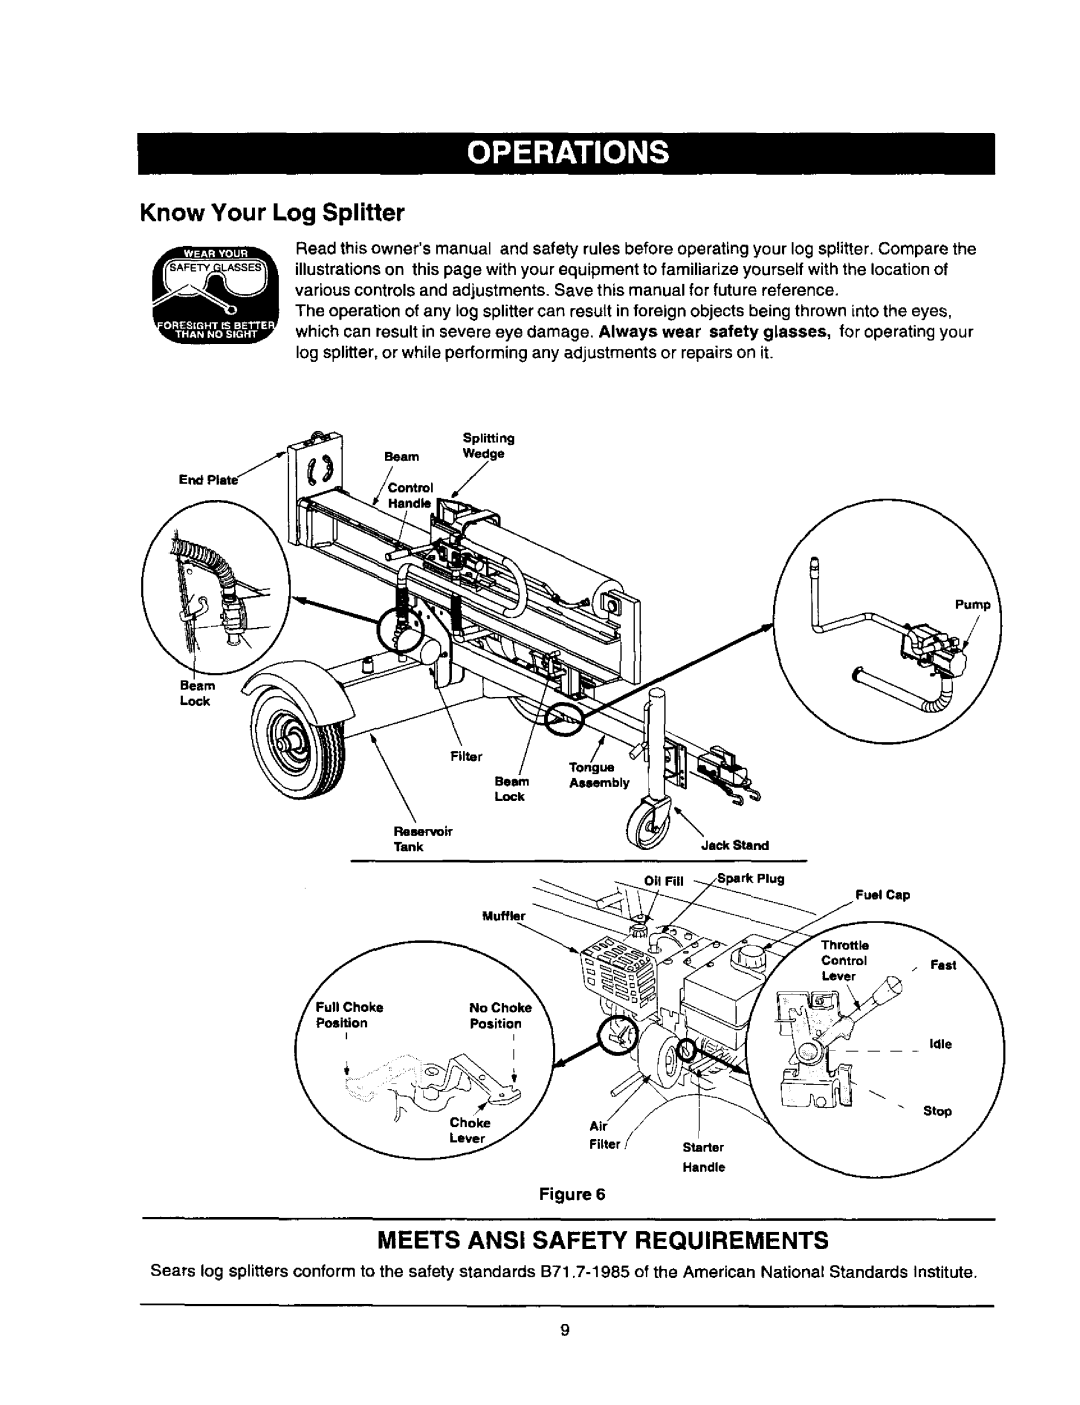 Craftsman 247.79452 owner manual Know Your Log Splitter, Meets Ansi Safety Requirements 